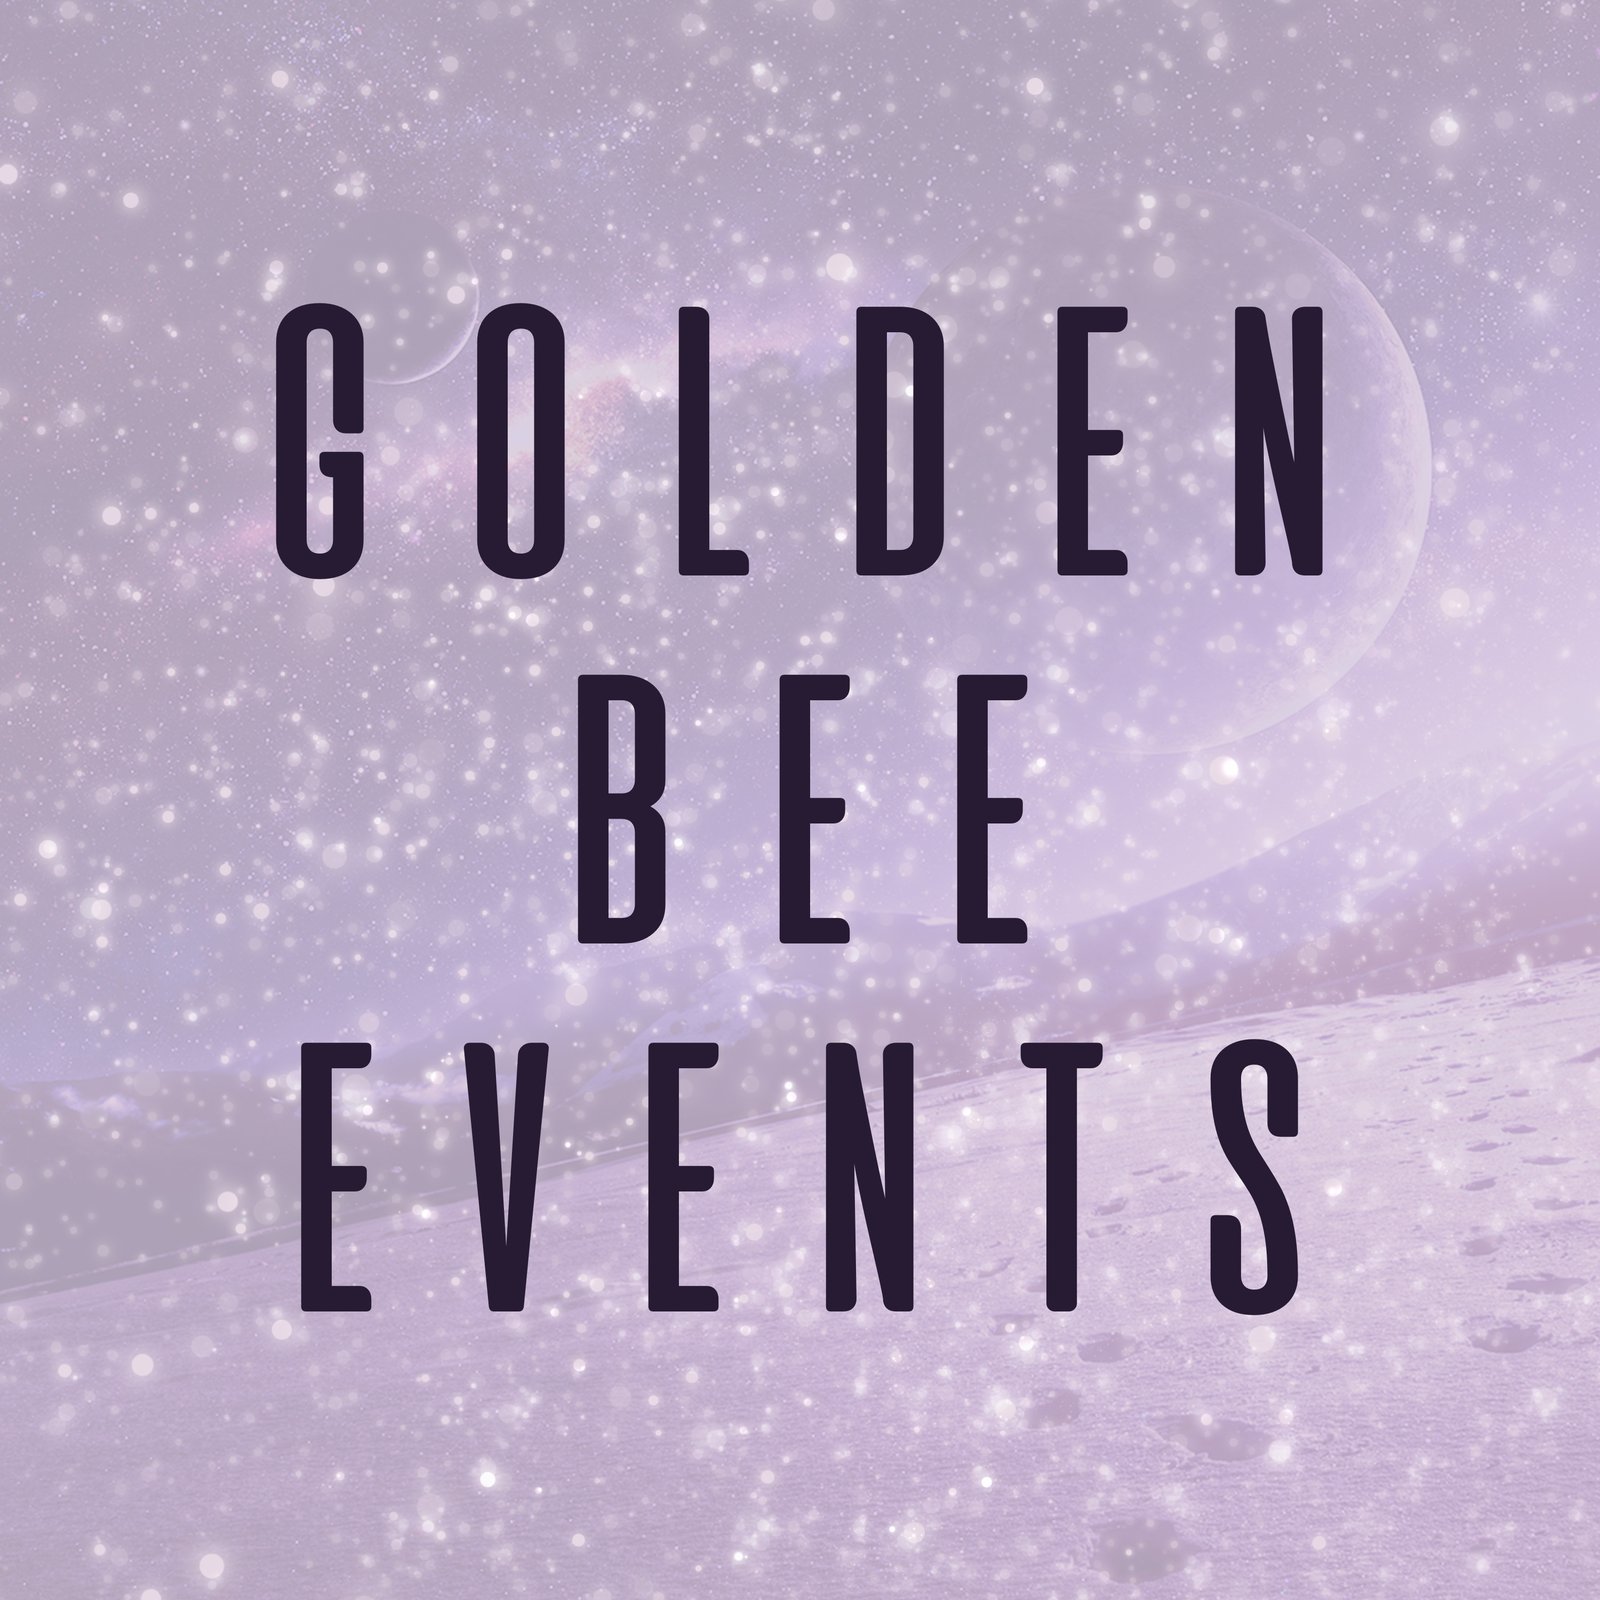 GoldenBeeEvents